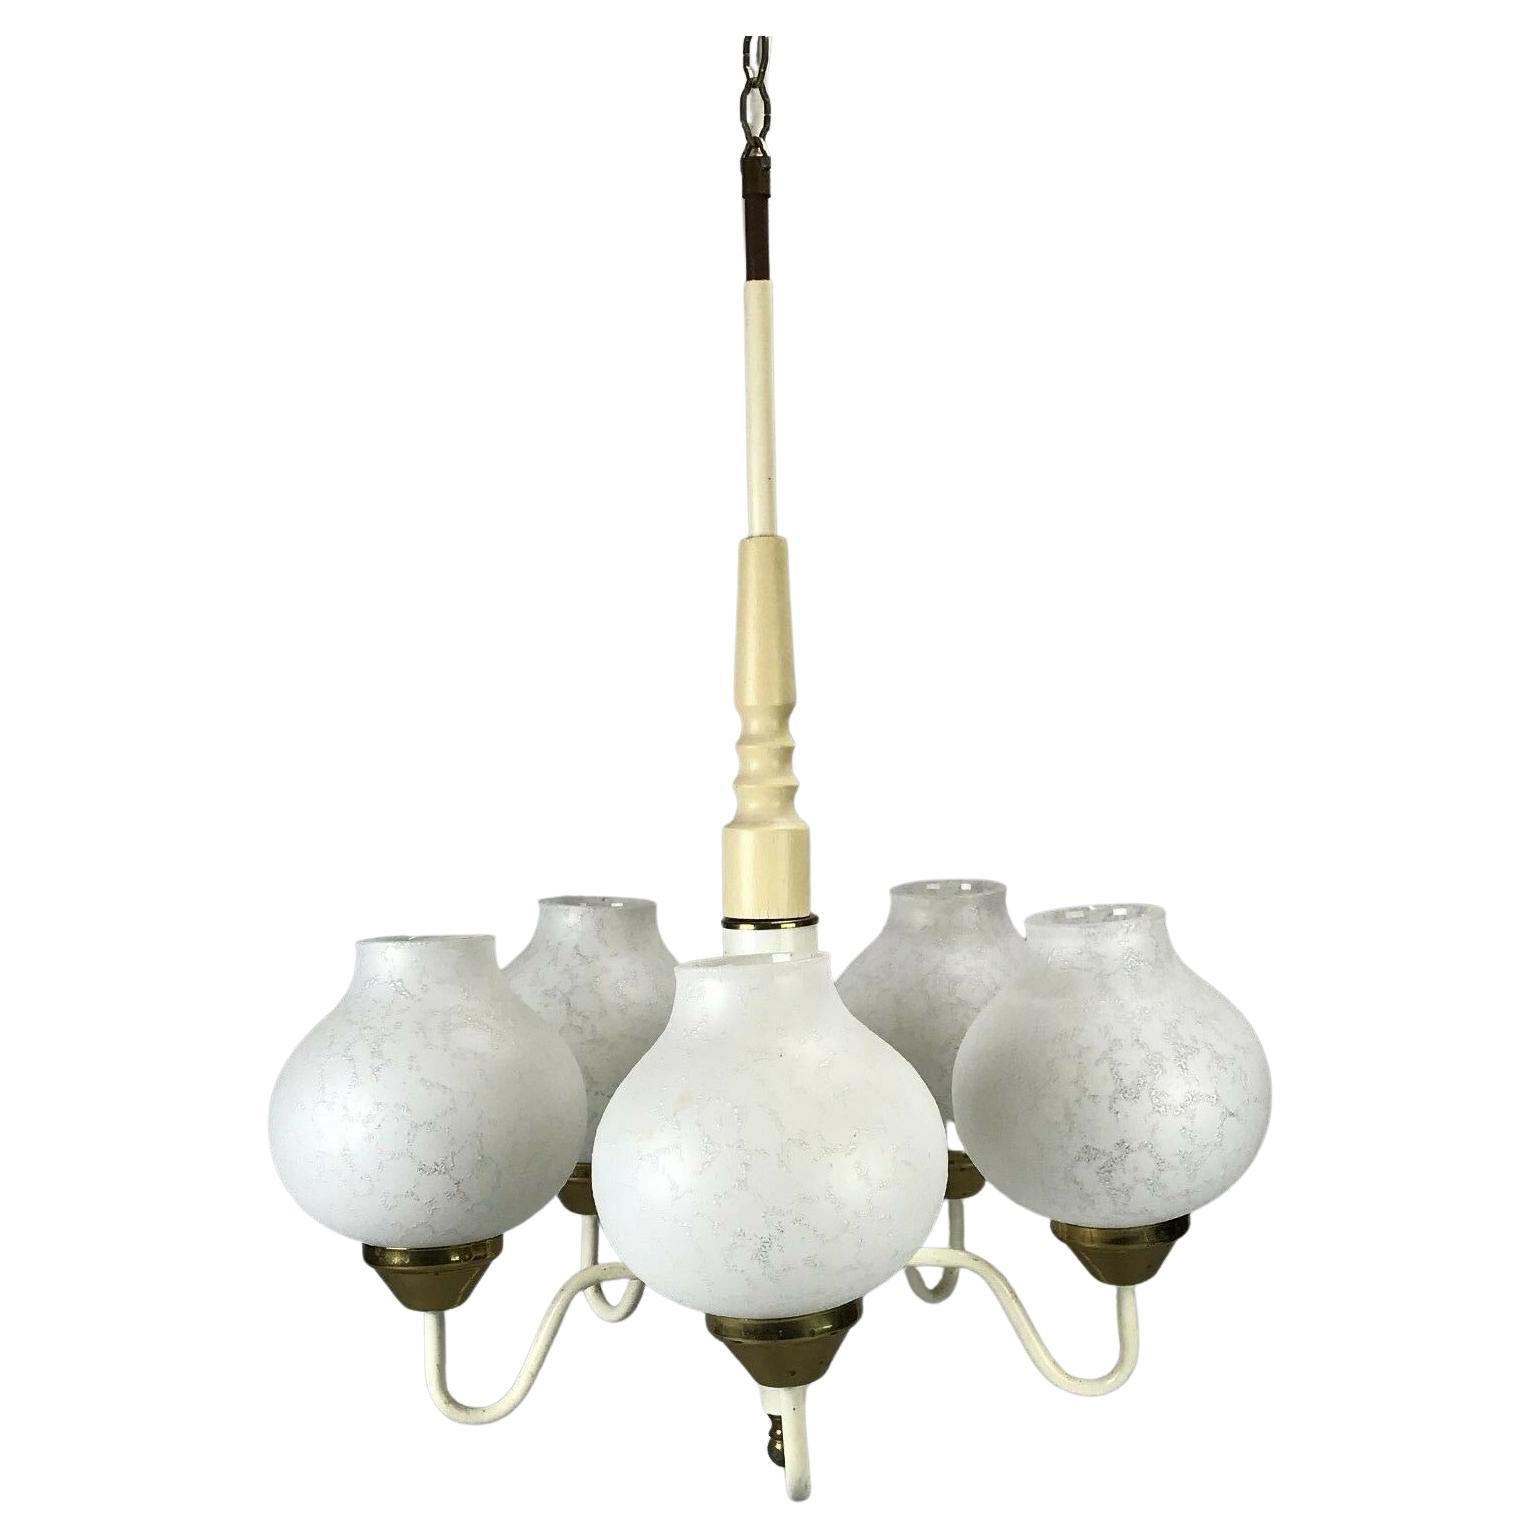 70s Lamp Light Ceiling Lamp Hanging Lamp Chandelier Space Age Design For Sale